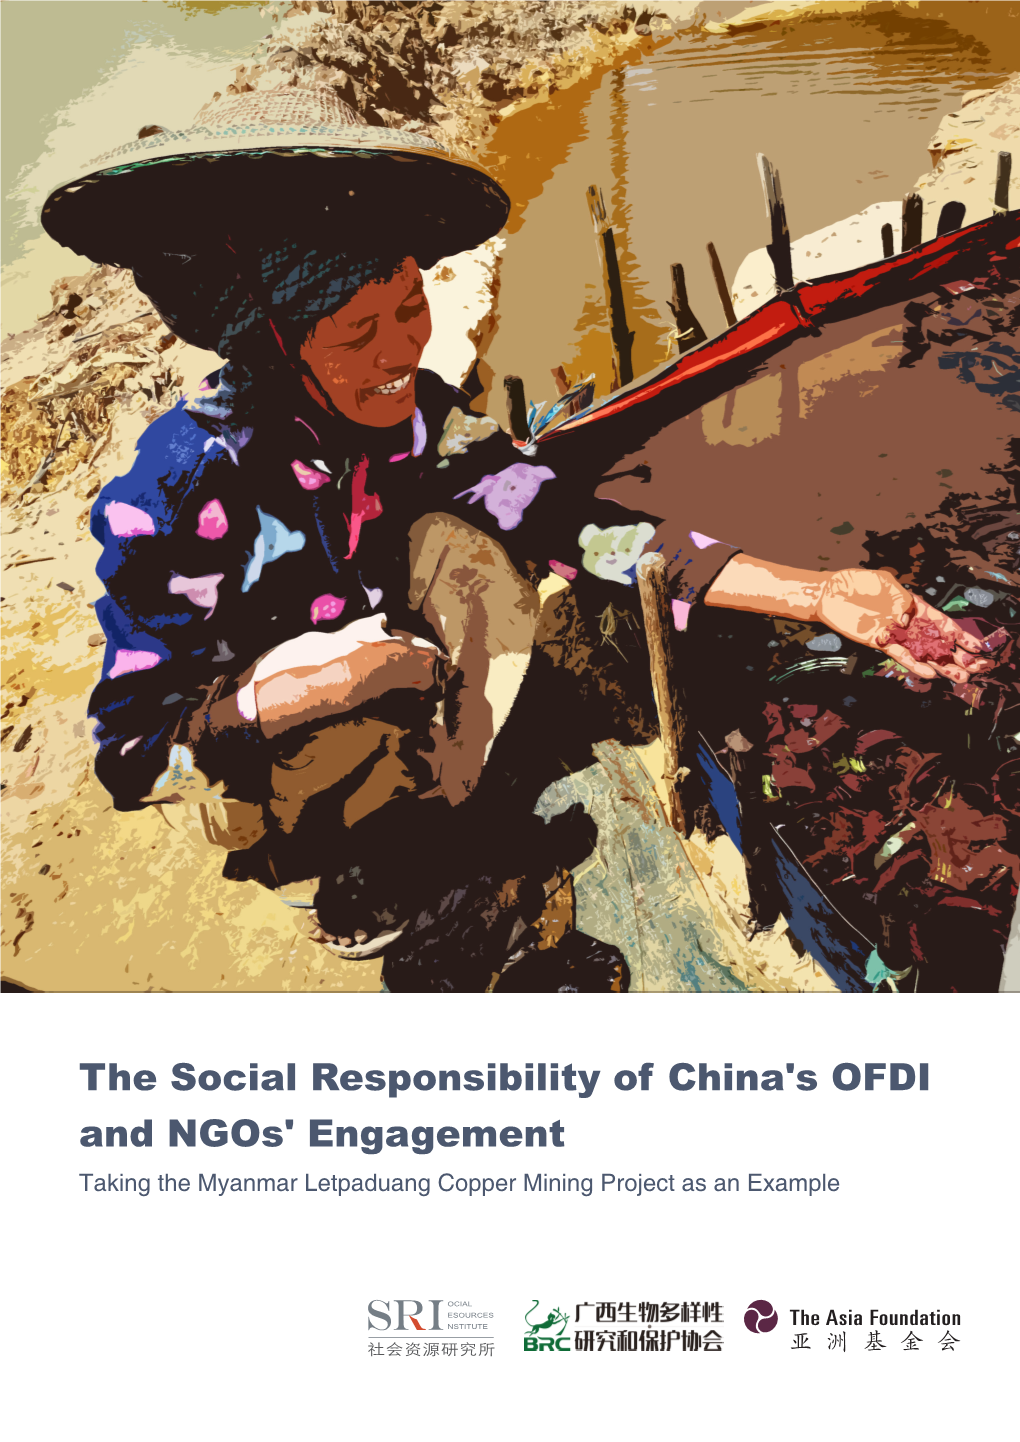 The Social Responsibility of China's OFDI and Ngos' Engagement Taking the Myanmar Letpaduang Copper Mining Project As an Example